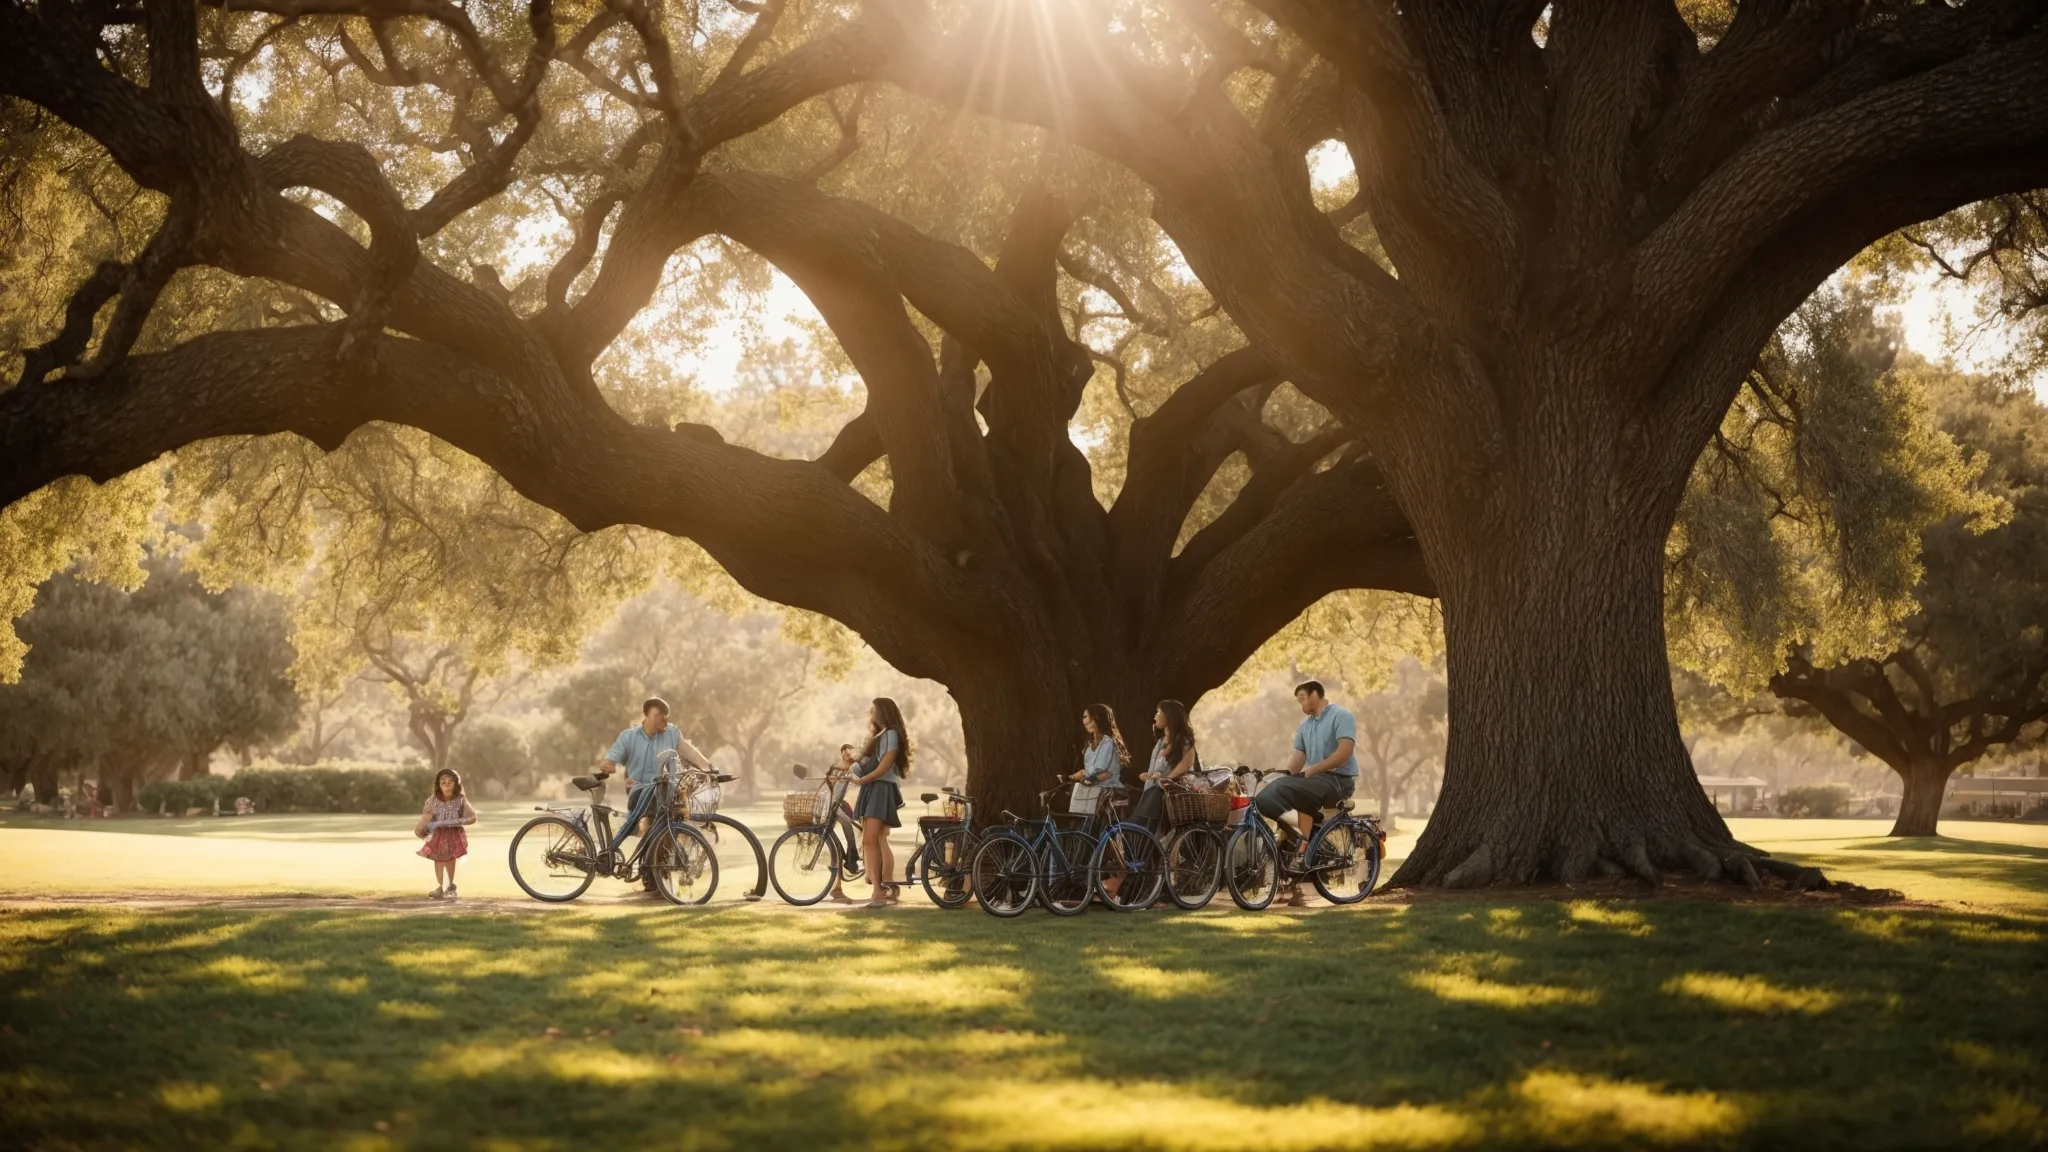 a family enjoys a picnic under a sprawling oak tree with their bicycles nearby in a sunlit san diego park.